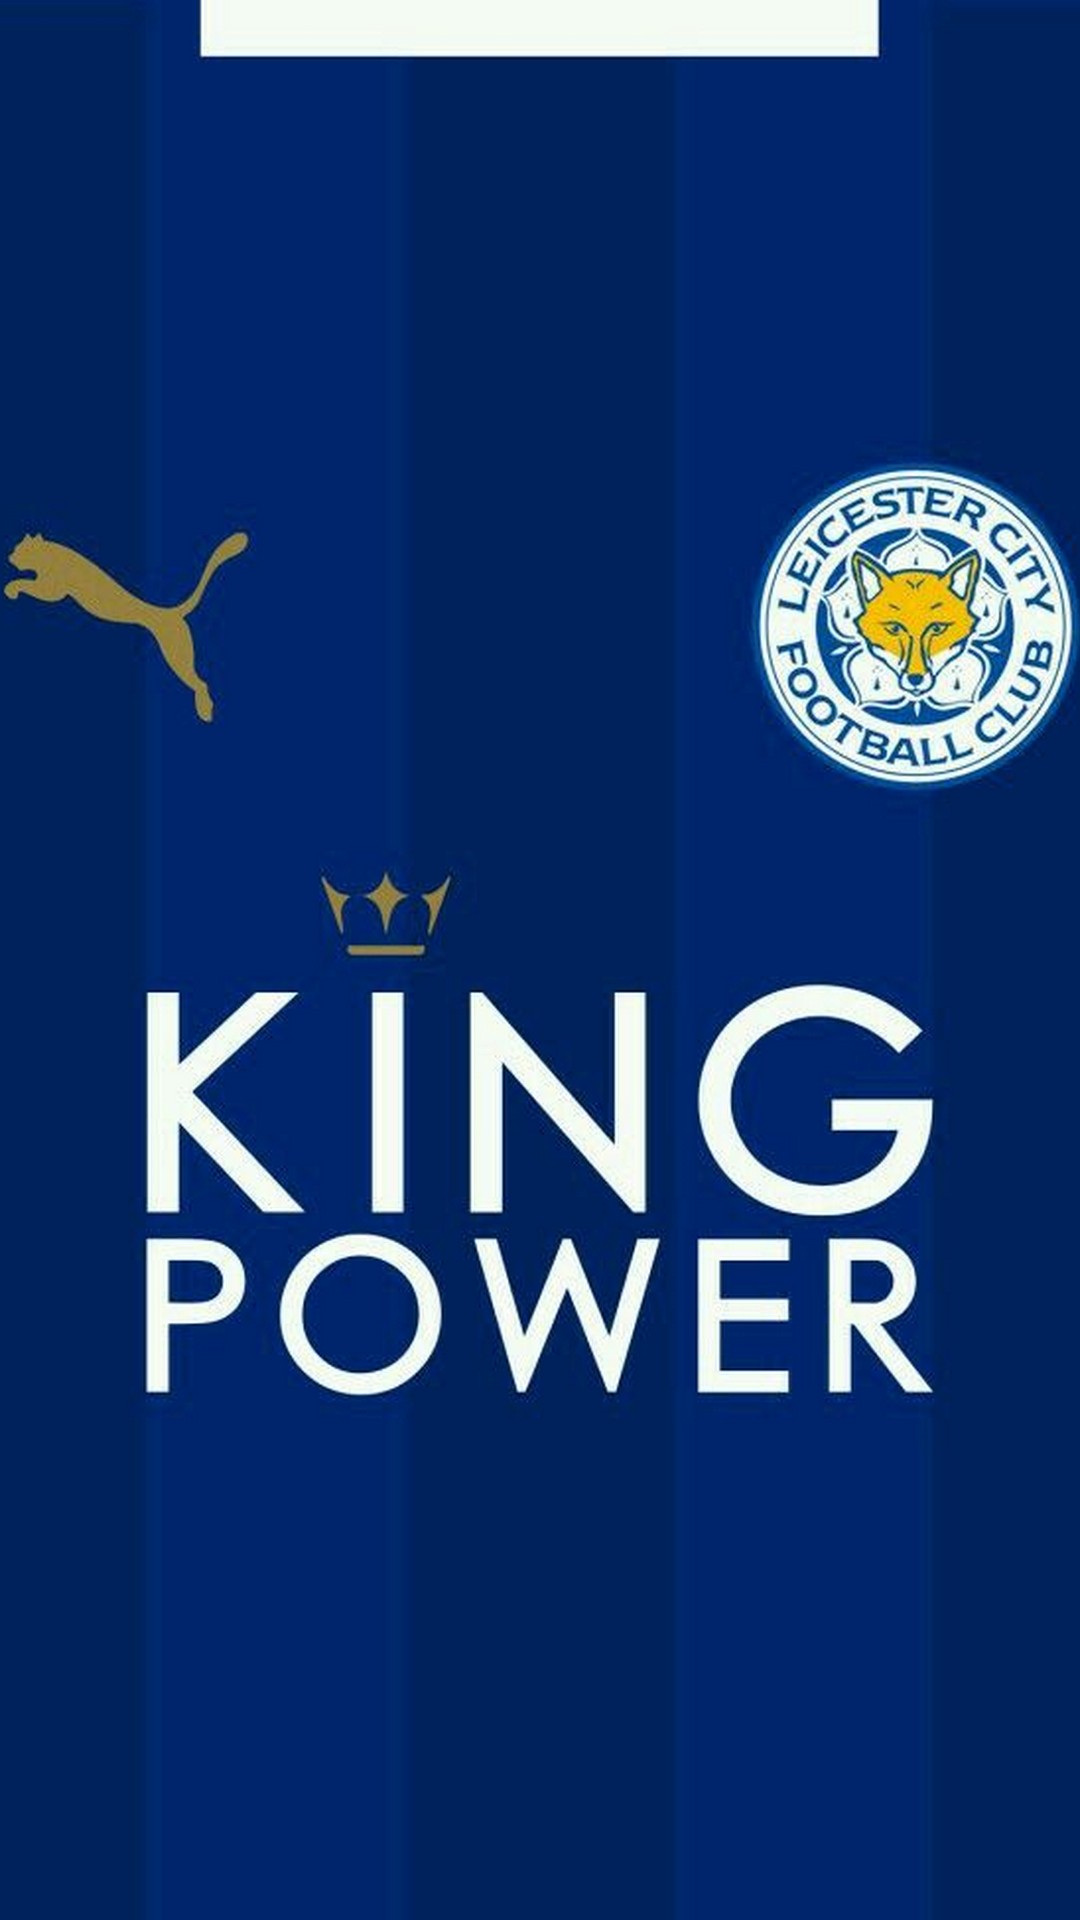 Leicester City FC Wallpaper iPhone HD With high-resolution 1080X1920 pixel. You can use this wallpaper for your Desktop Computers, Mac Screensavers, Windows Backgrounds, iPhone Wallpapers, Tablet or Android Lock screen and another Mobile device